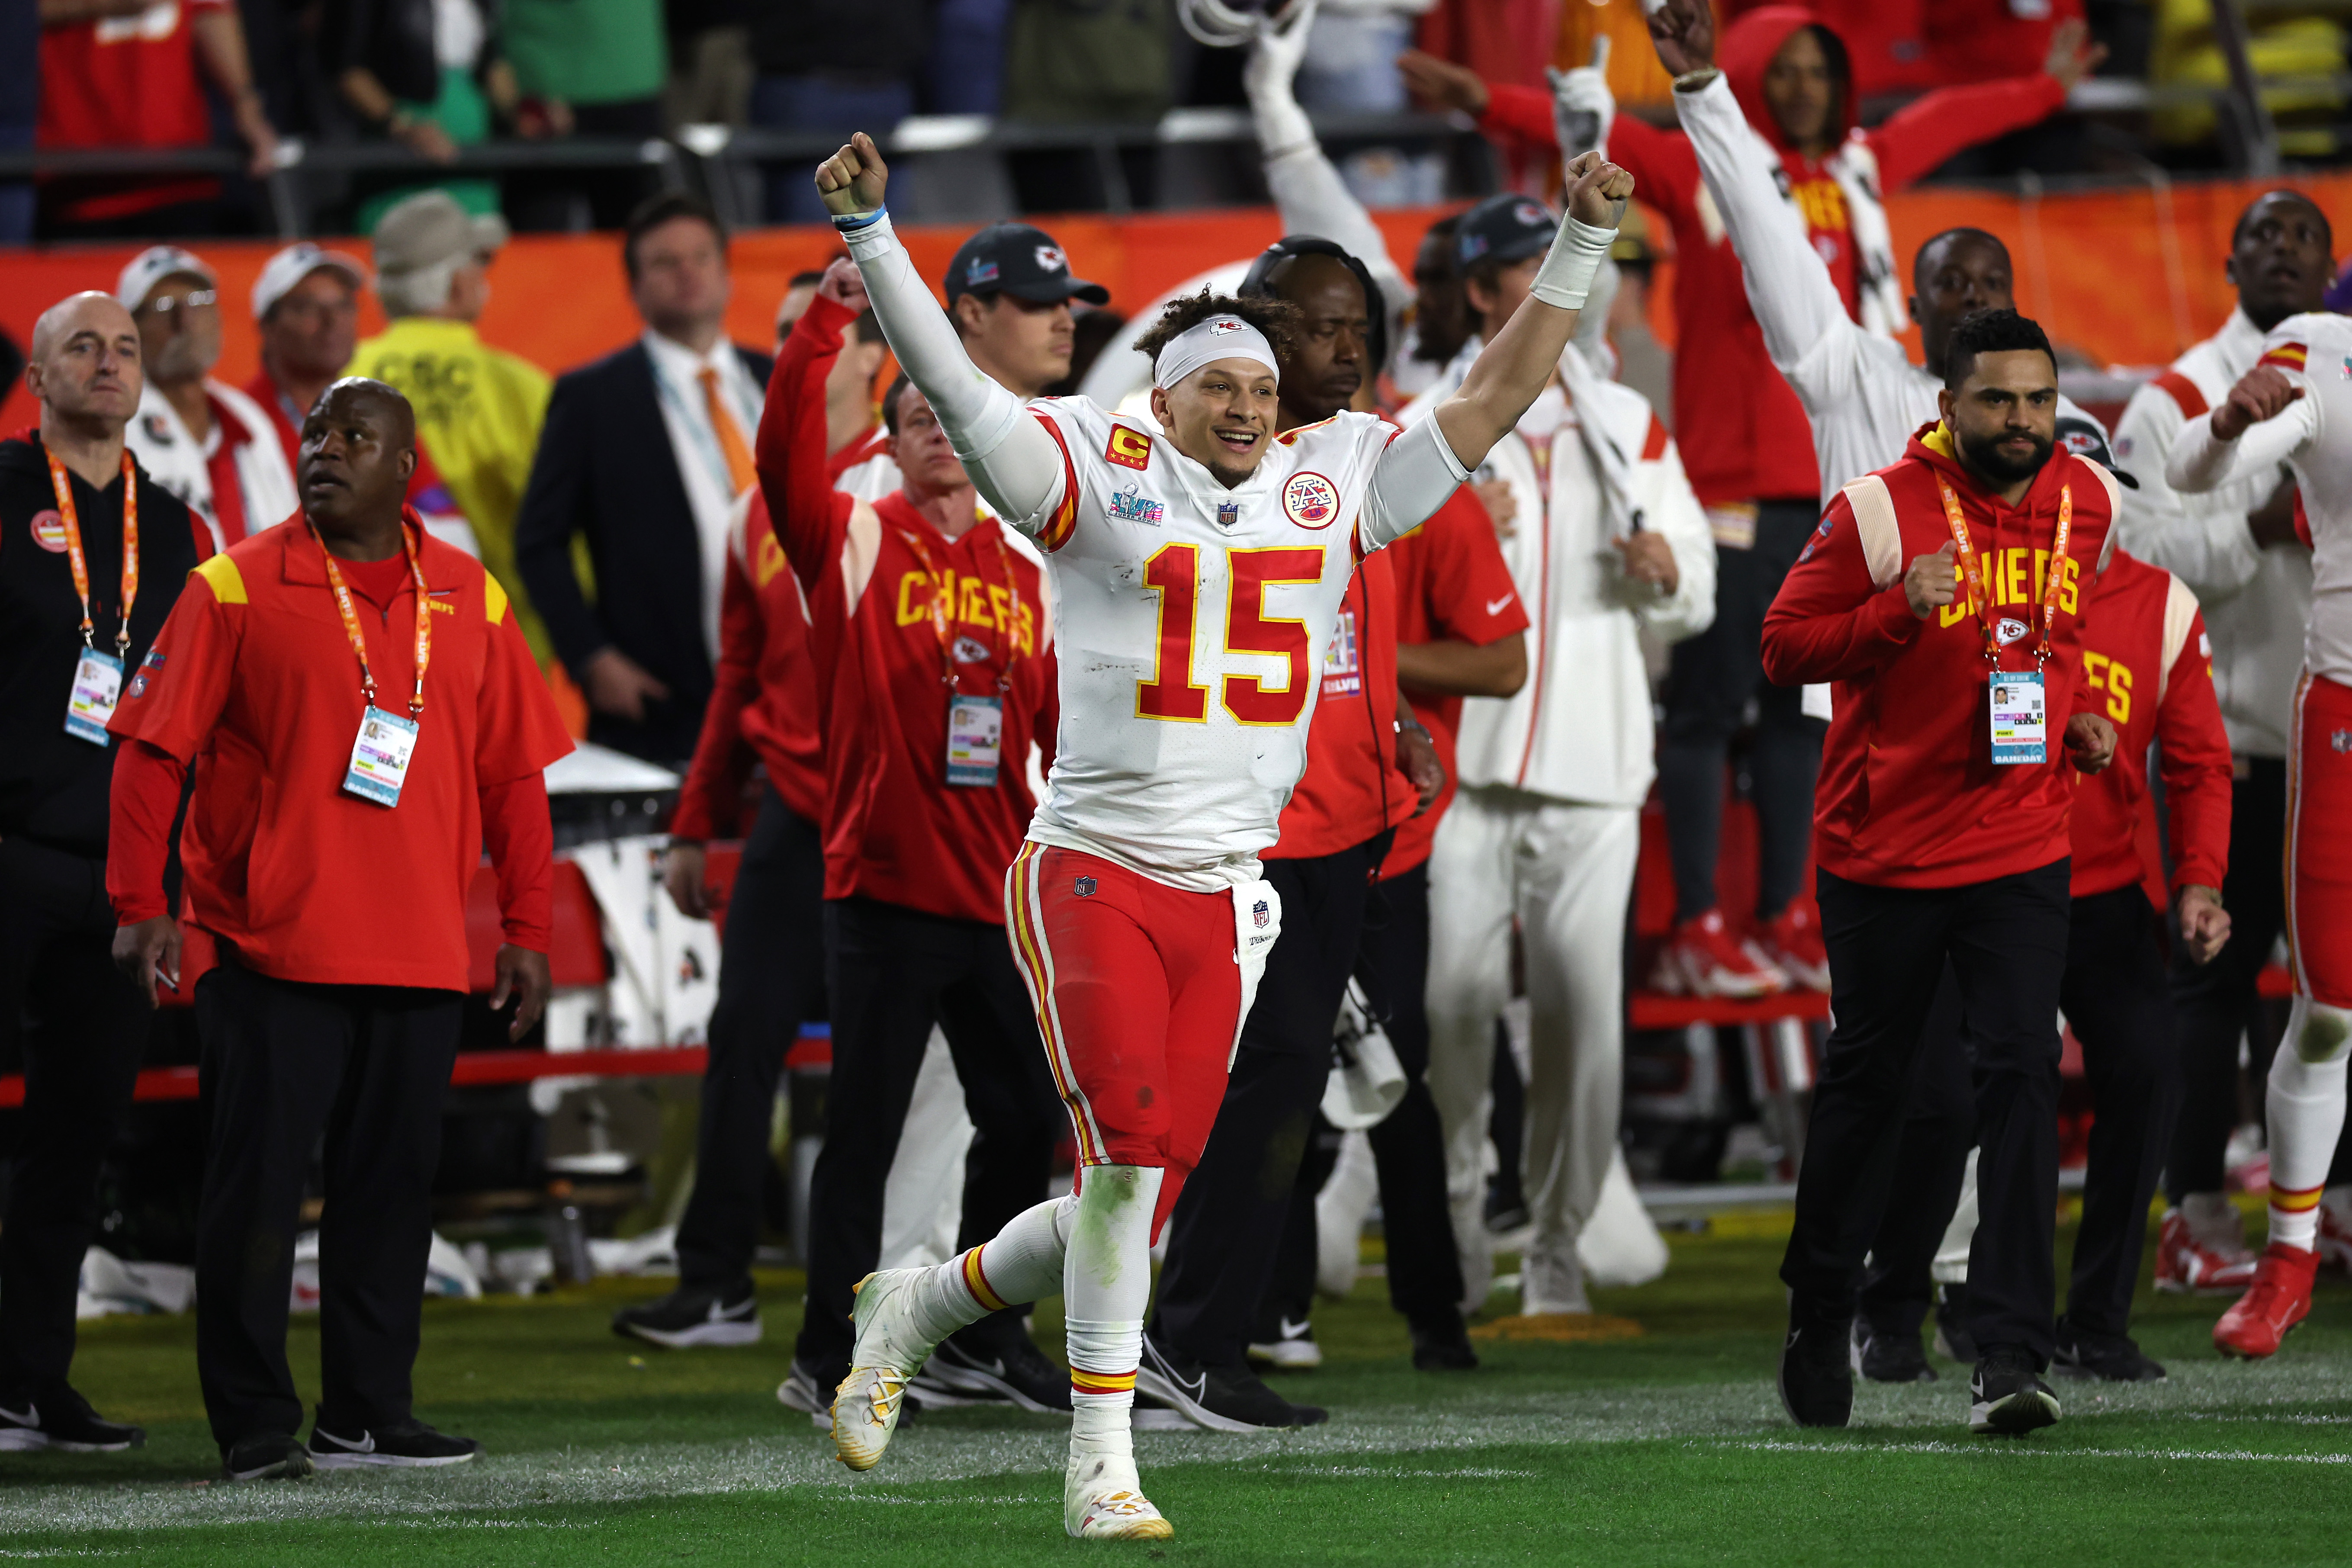 Kansas City Chiefs to celebrate Super Bowl LVII with fans at NFL opener